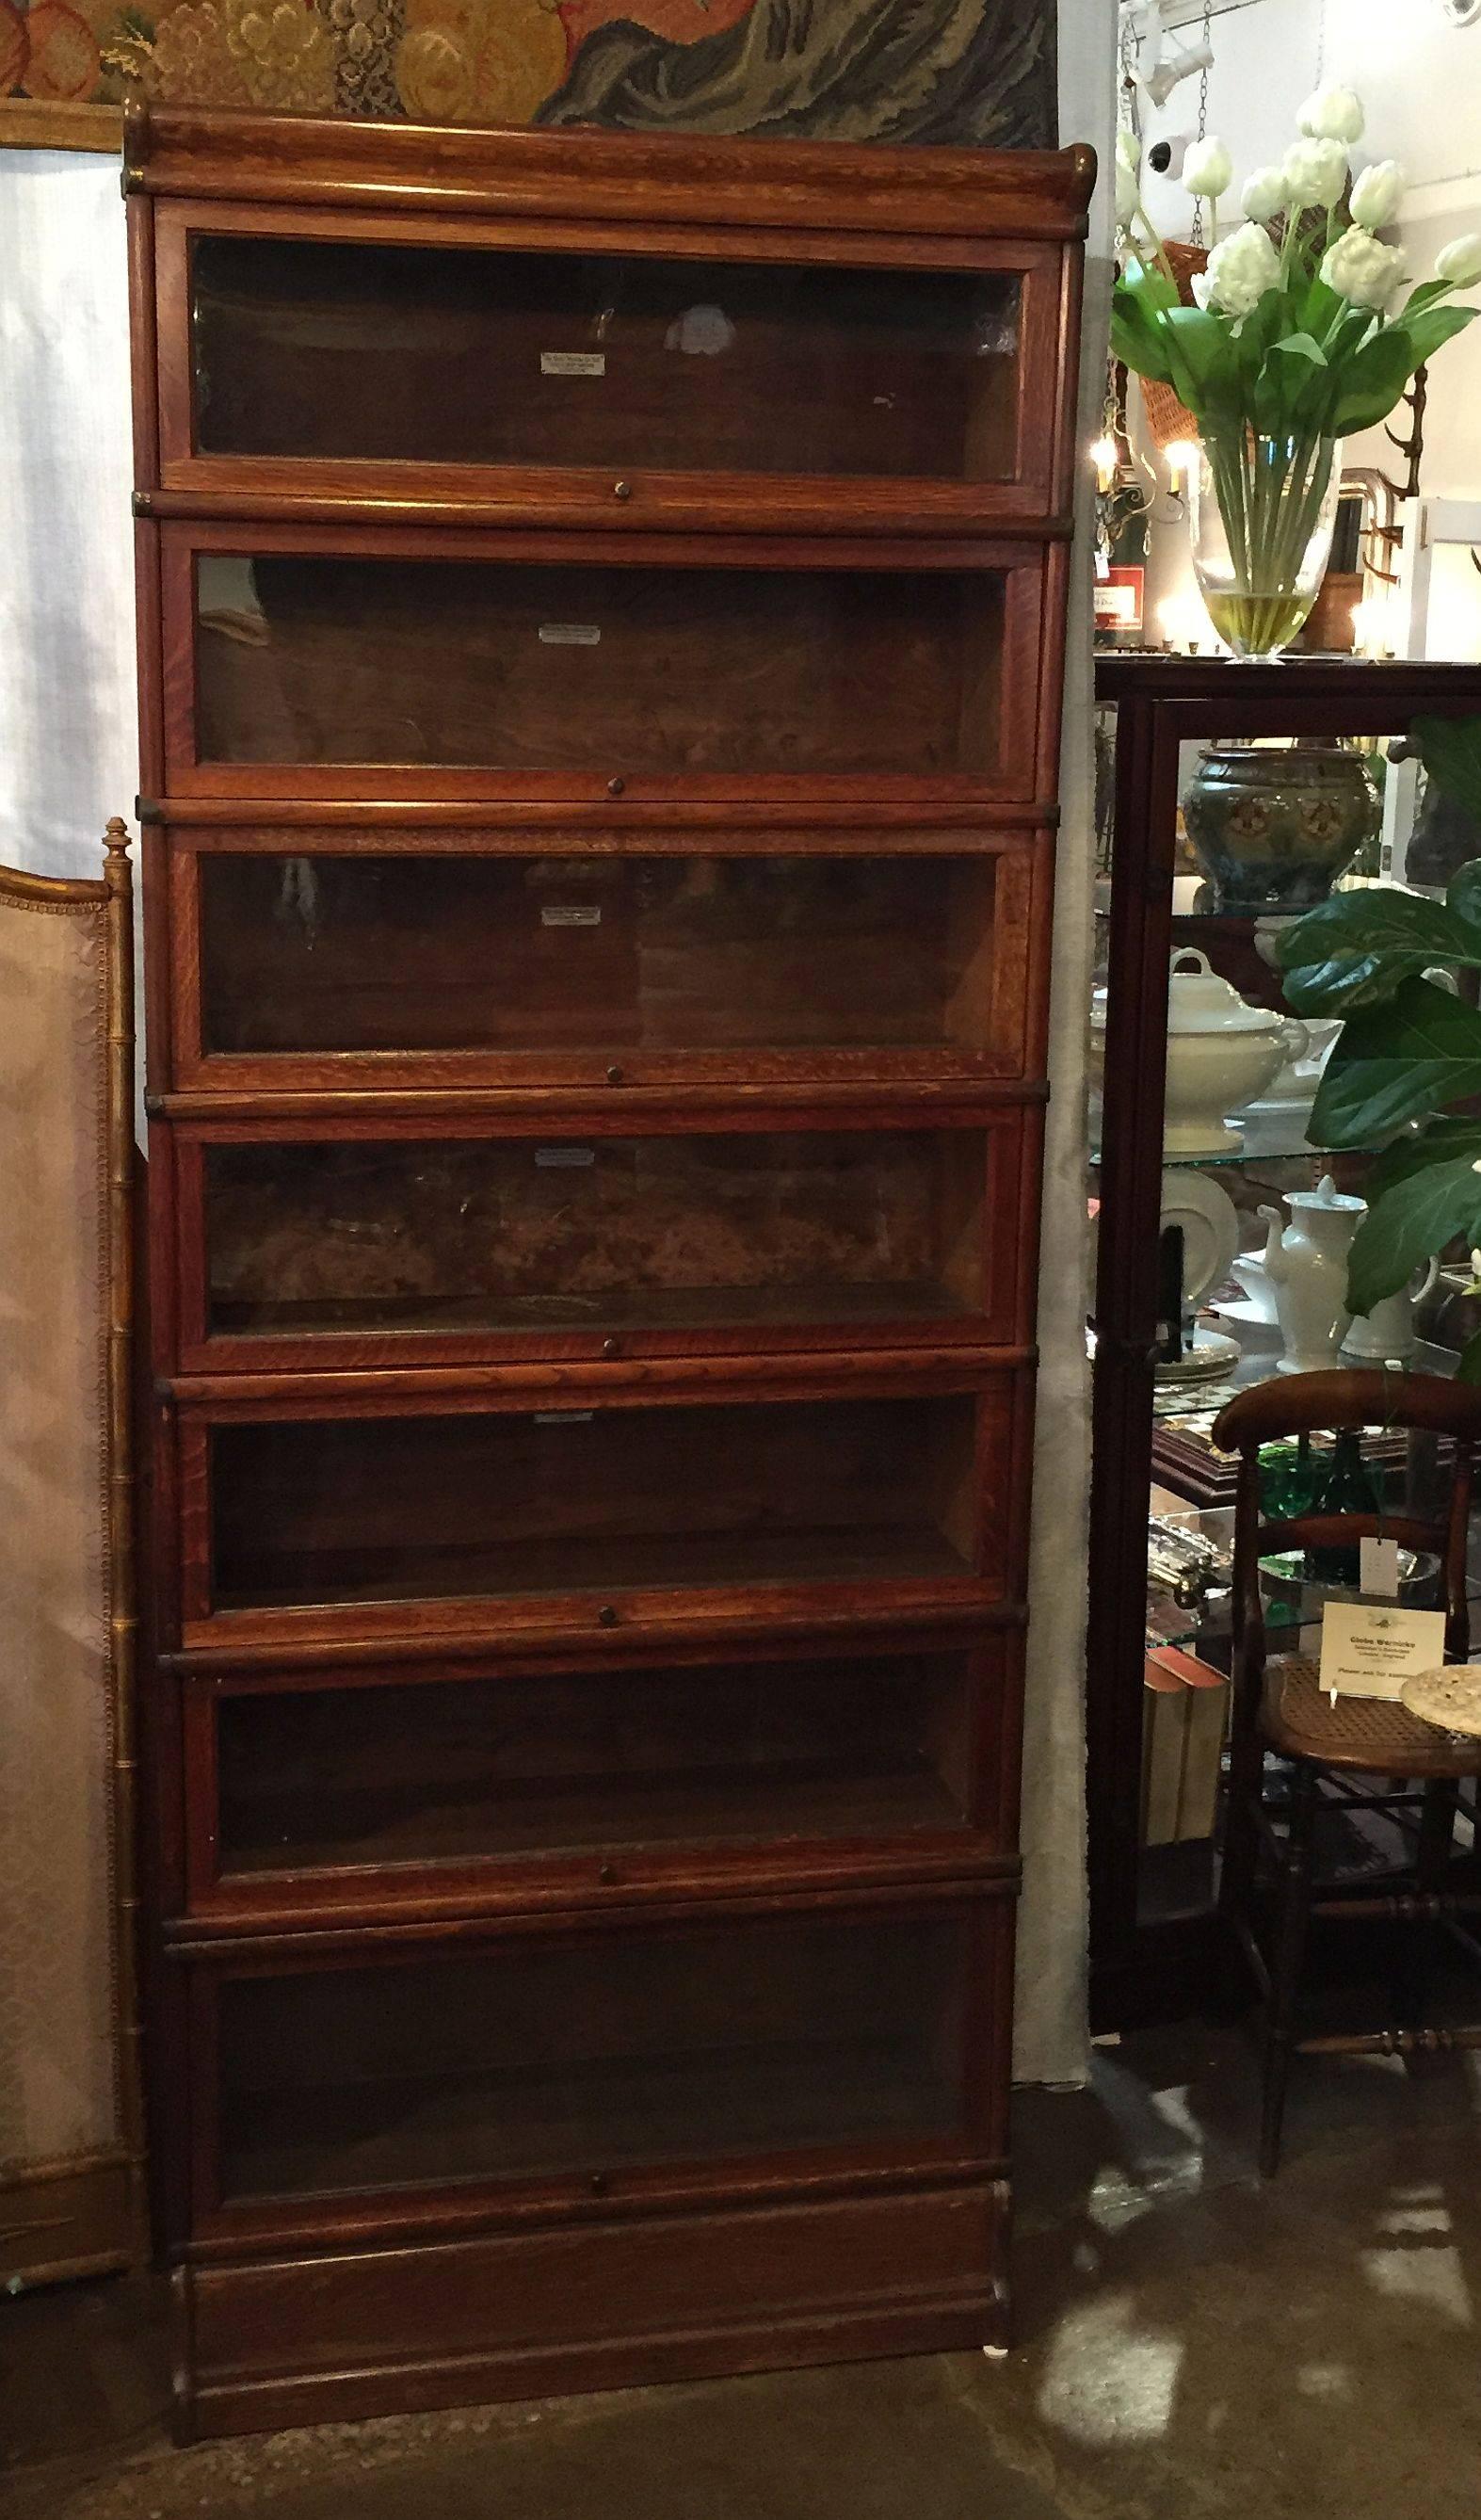 A tall English lawyer's or solicitor's stacking bookcase of oak and glass by the celebrated furniture-makers, Globe-Wernicke.

Includes a fitted moulded top, seven compartments with sliding glass fronts, and fitted moulded base. (Breaks down into